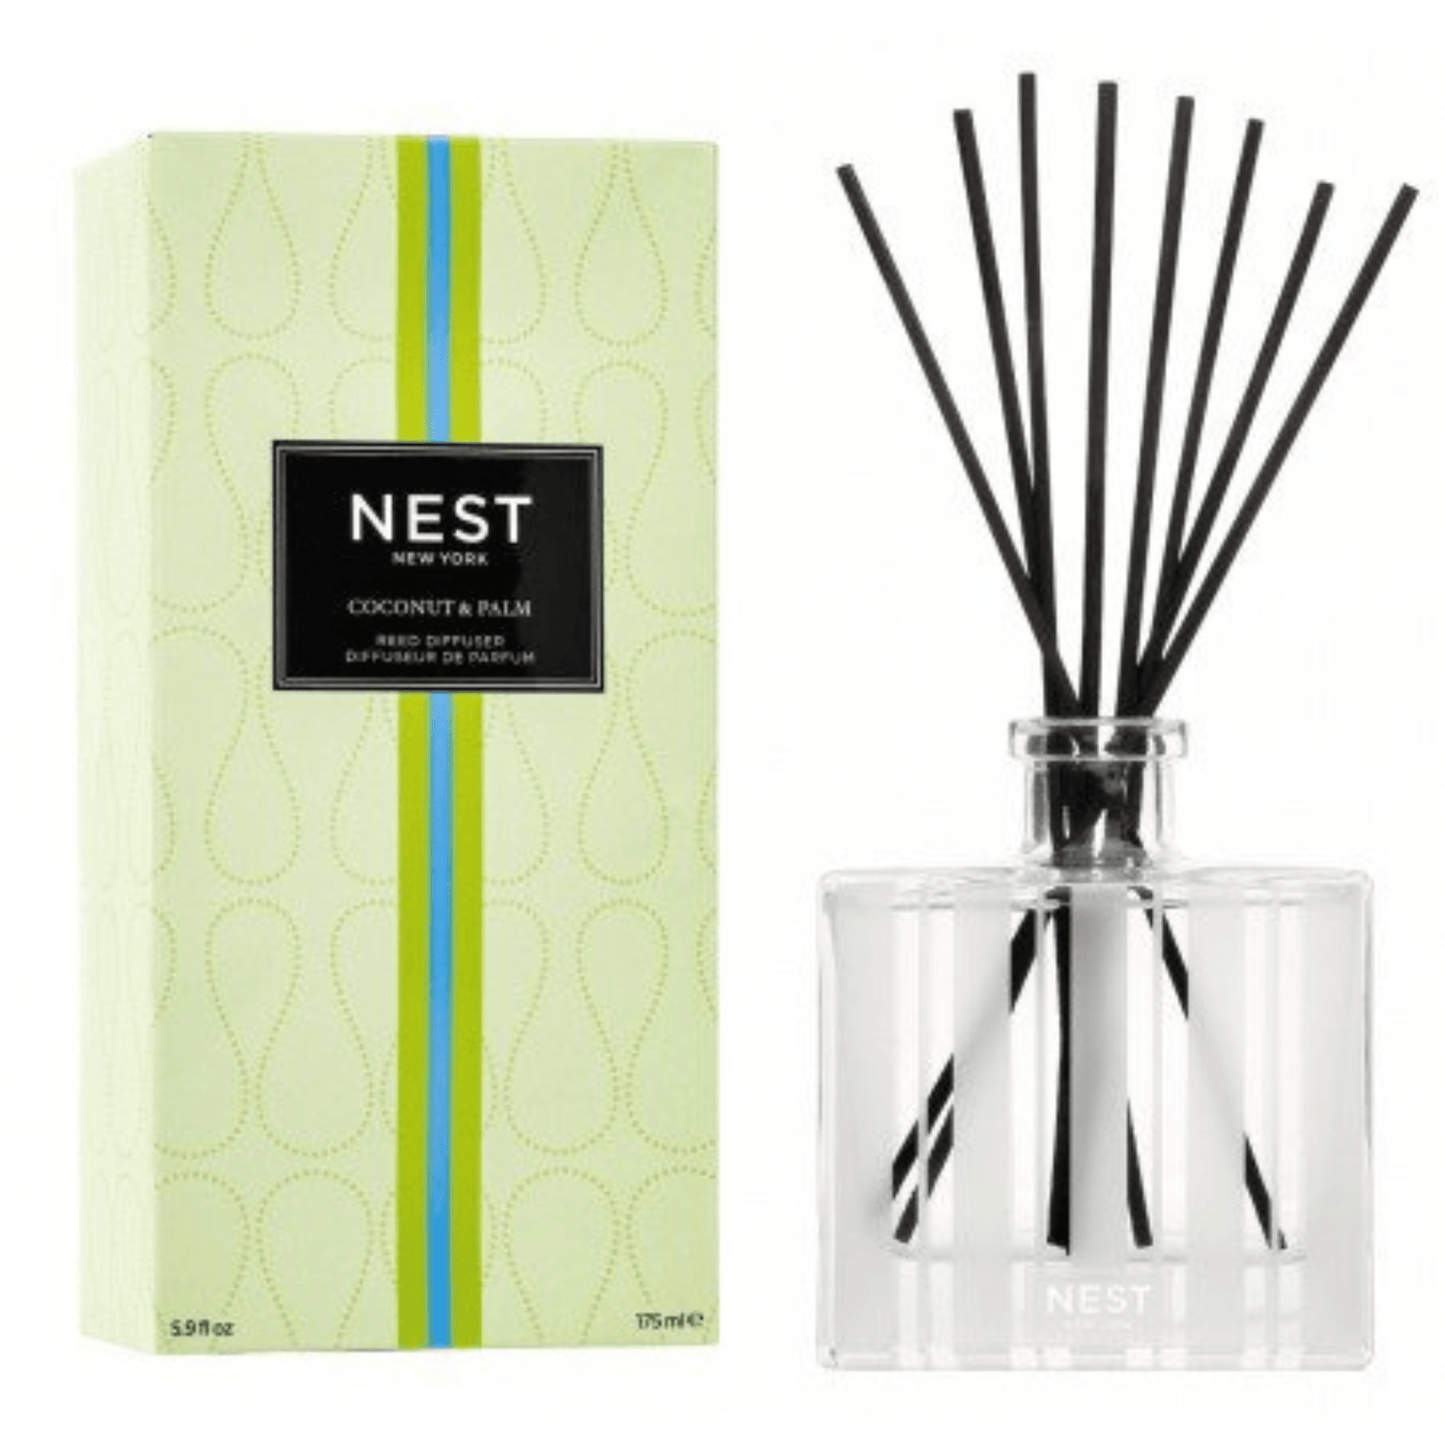 Primary Image of Coconut & Palm Reed Diffuser